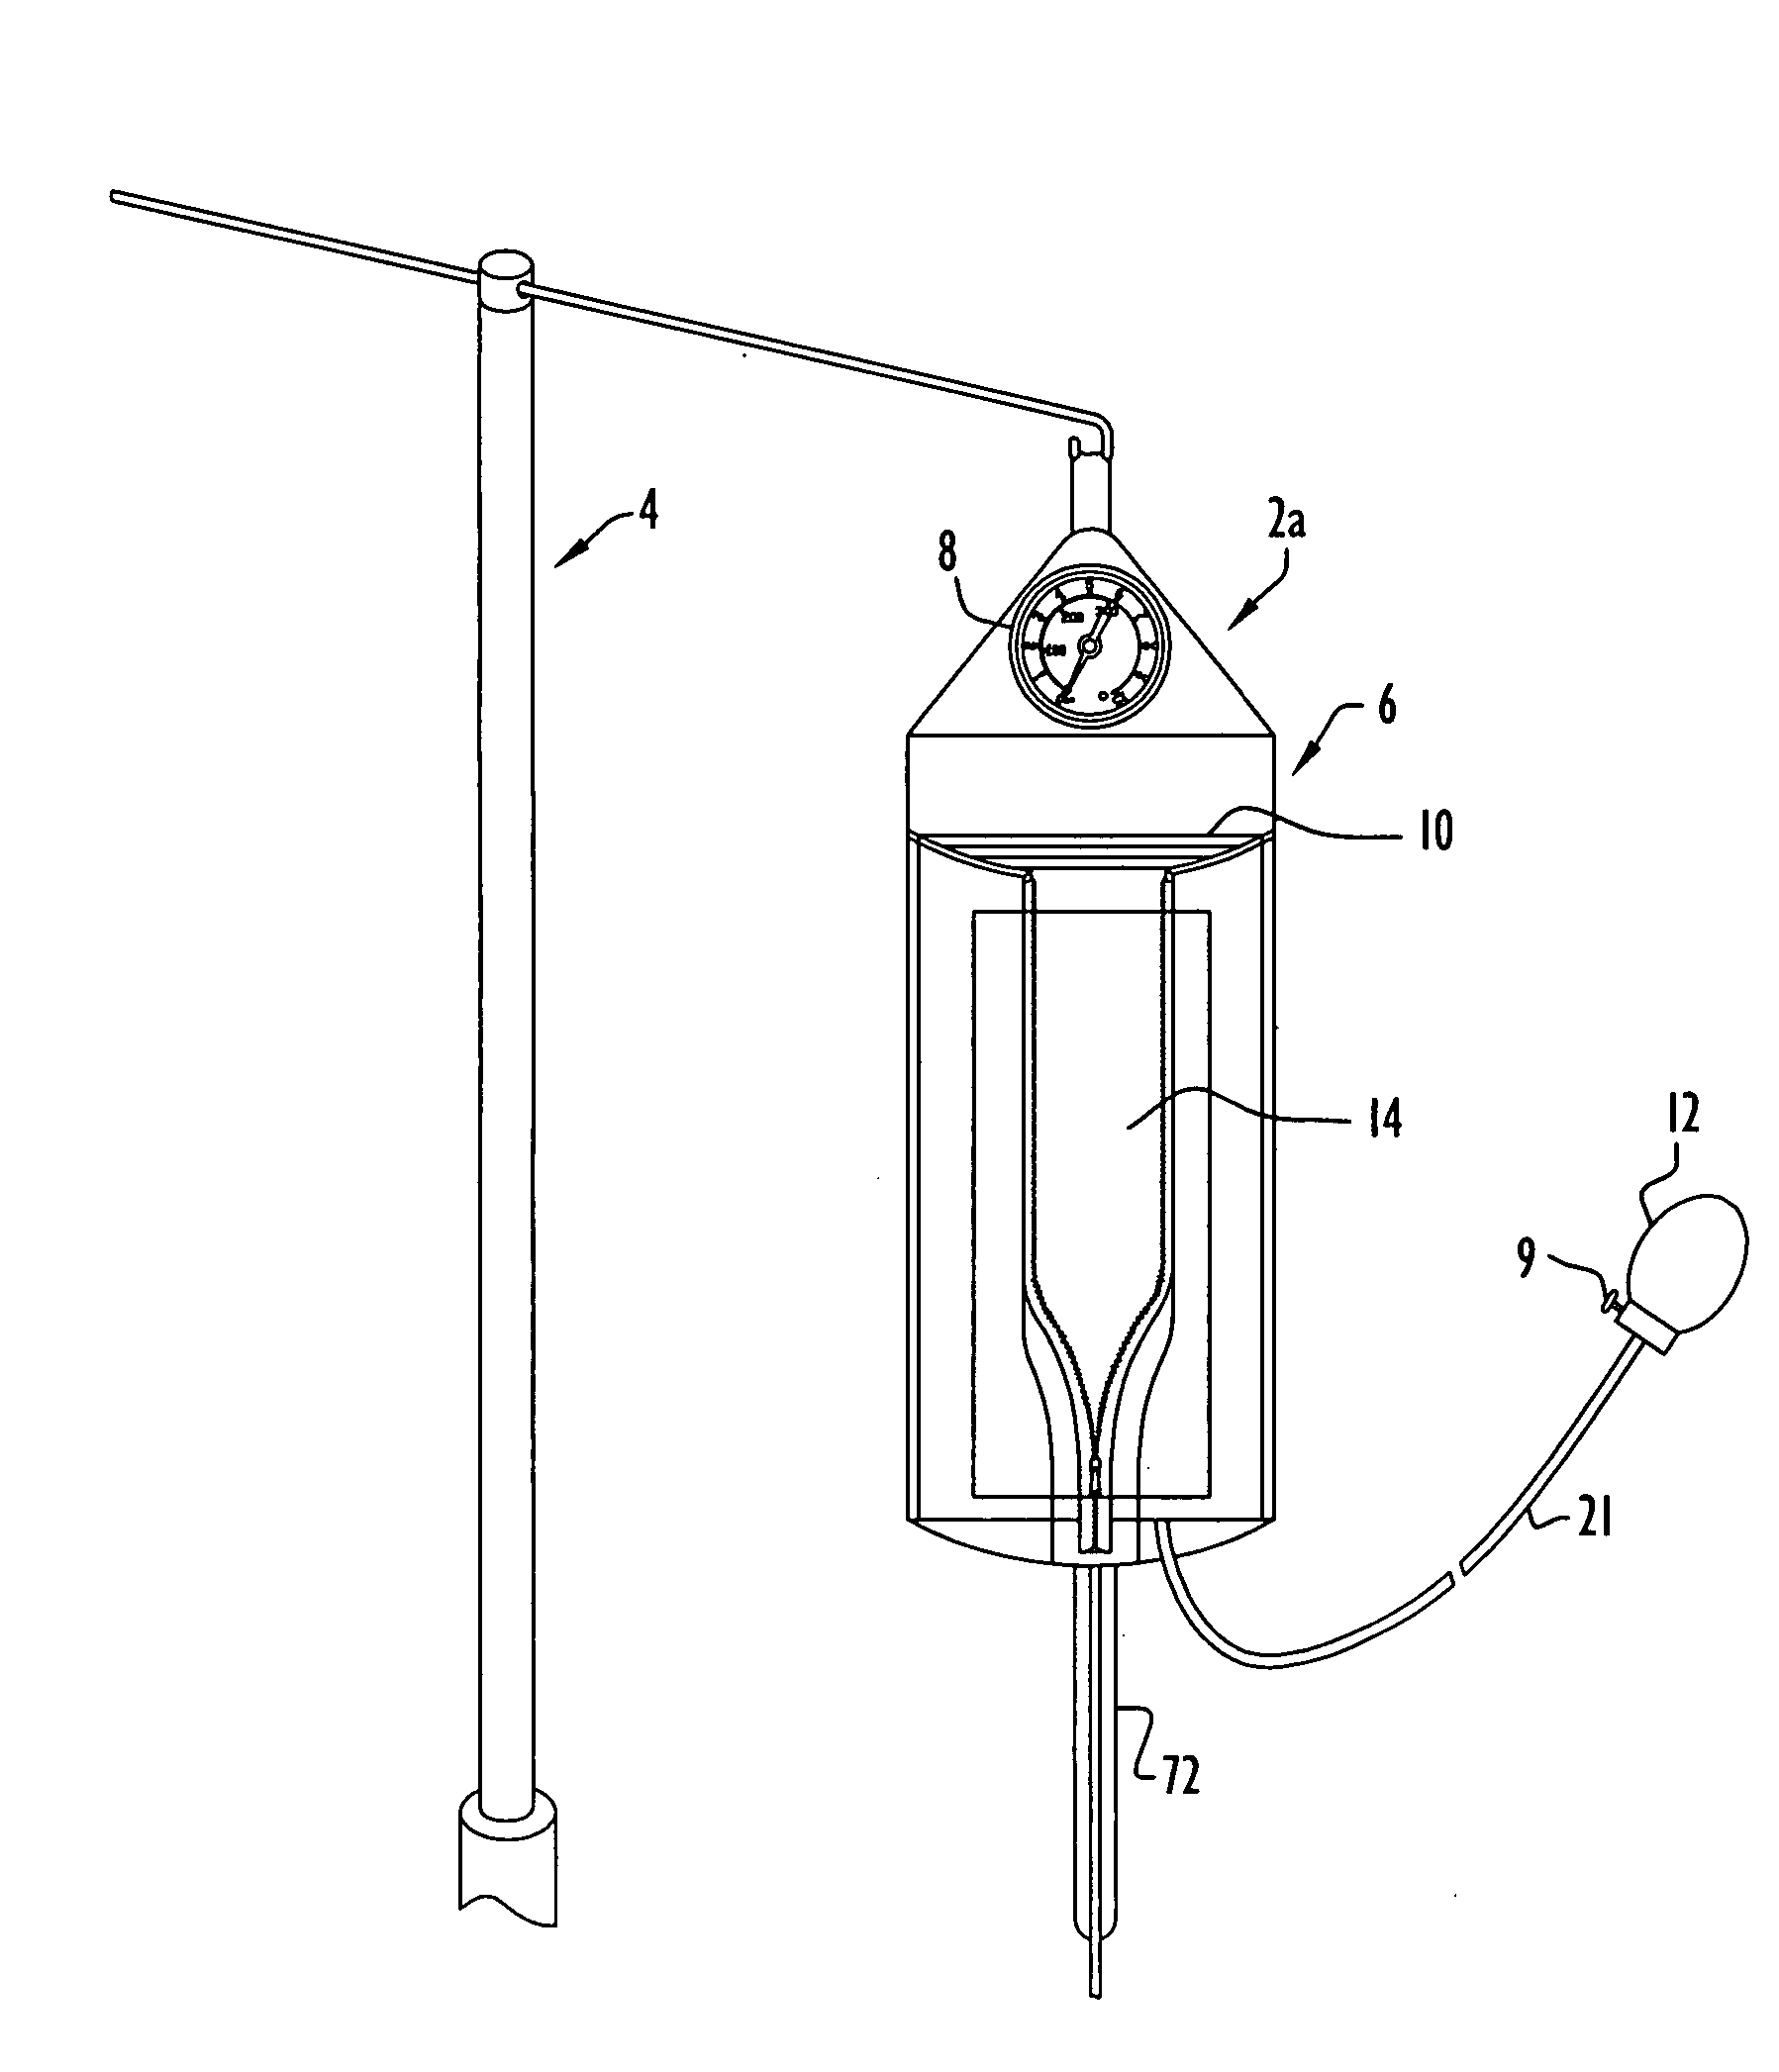 Method and apparatus for pressure infusion and temperature control of infused liquids